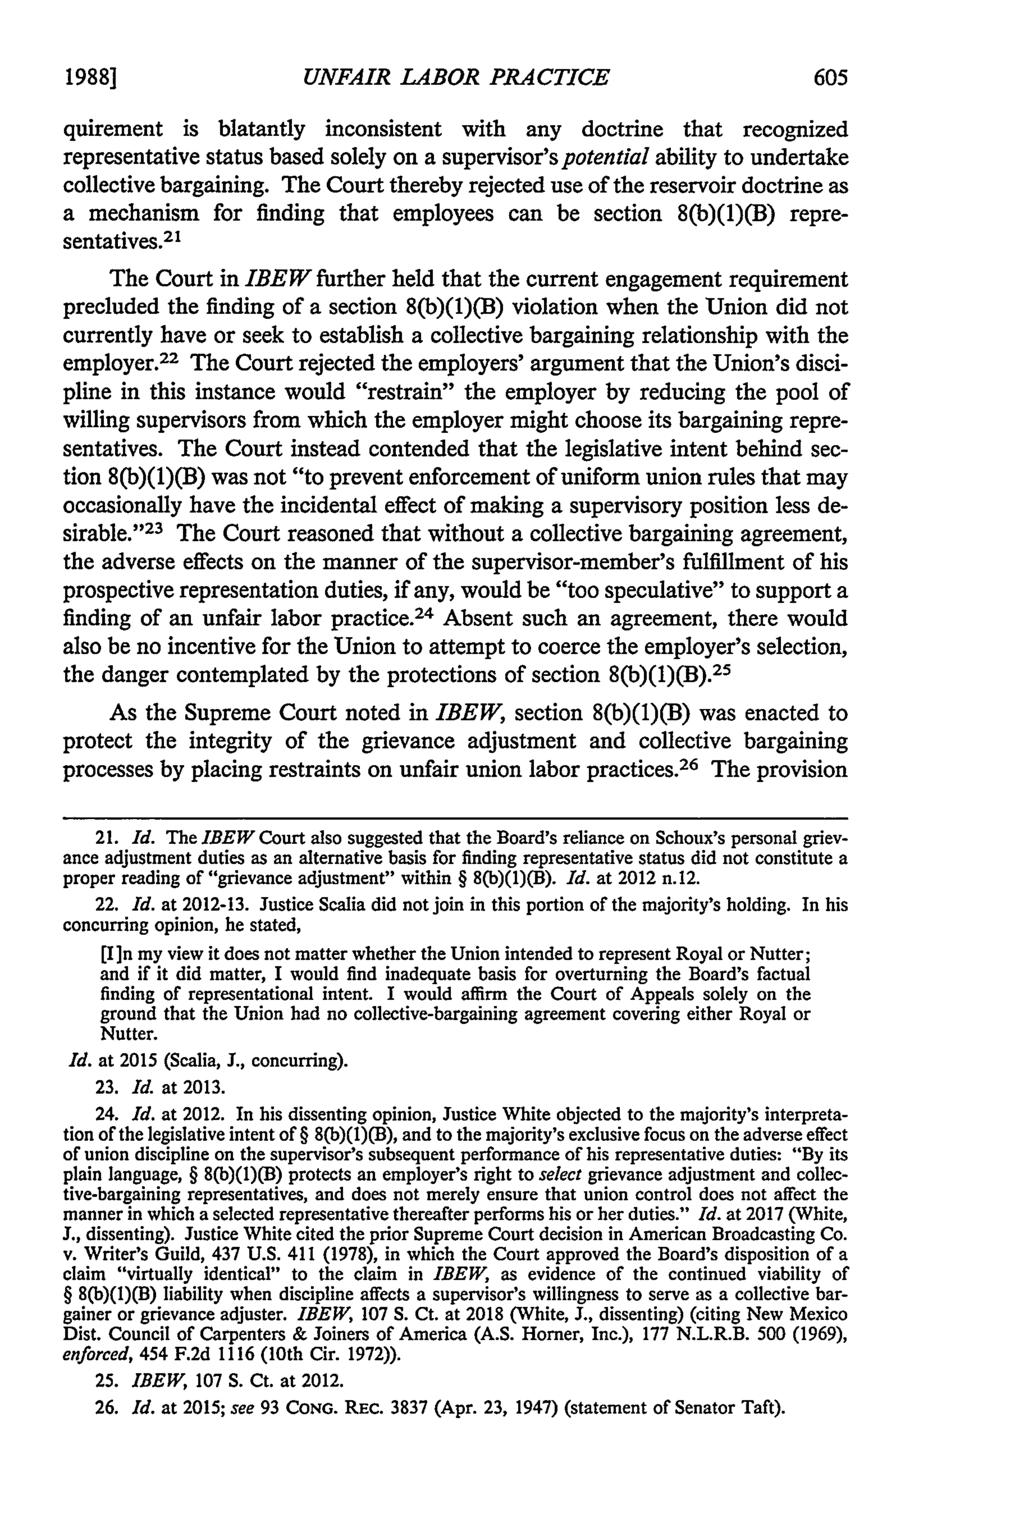 1988] UNFAIR LABOR PRACTICE quirement is blatantly inconsistent with any doctrine that recognized representative status based solely on a supervisor's potential ability to undertake collective